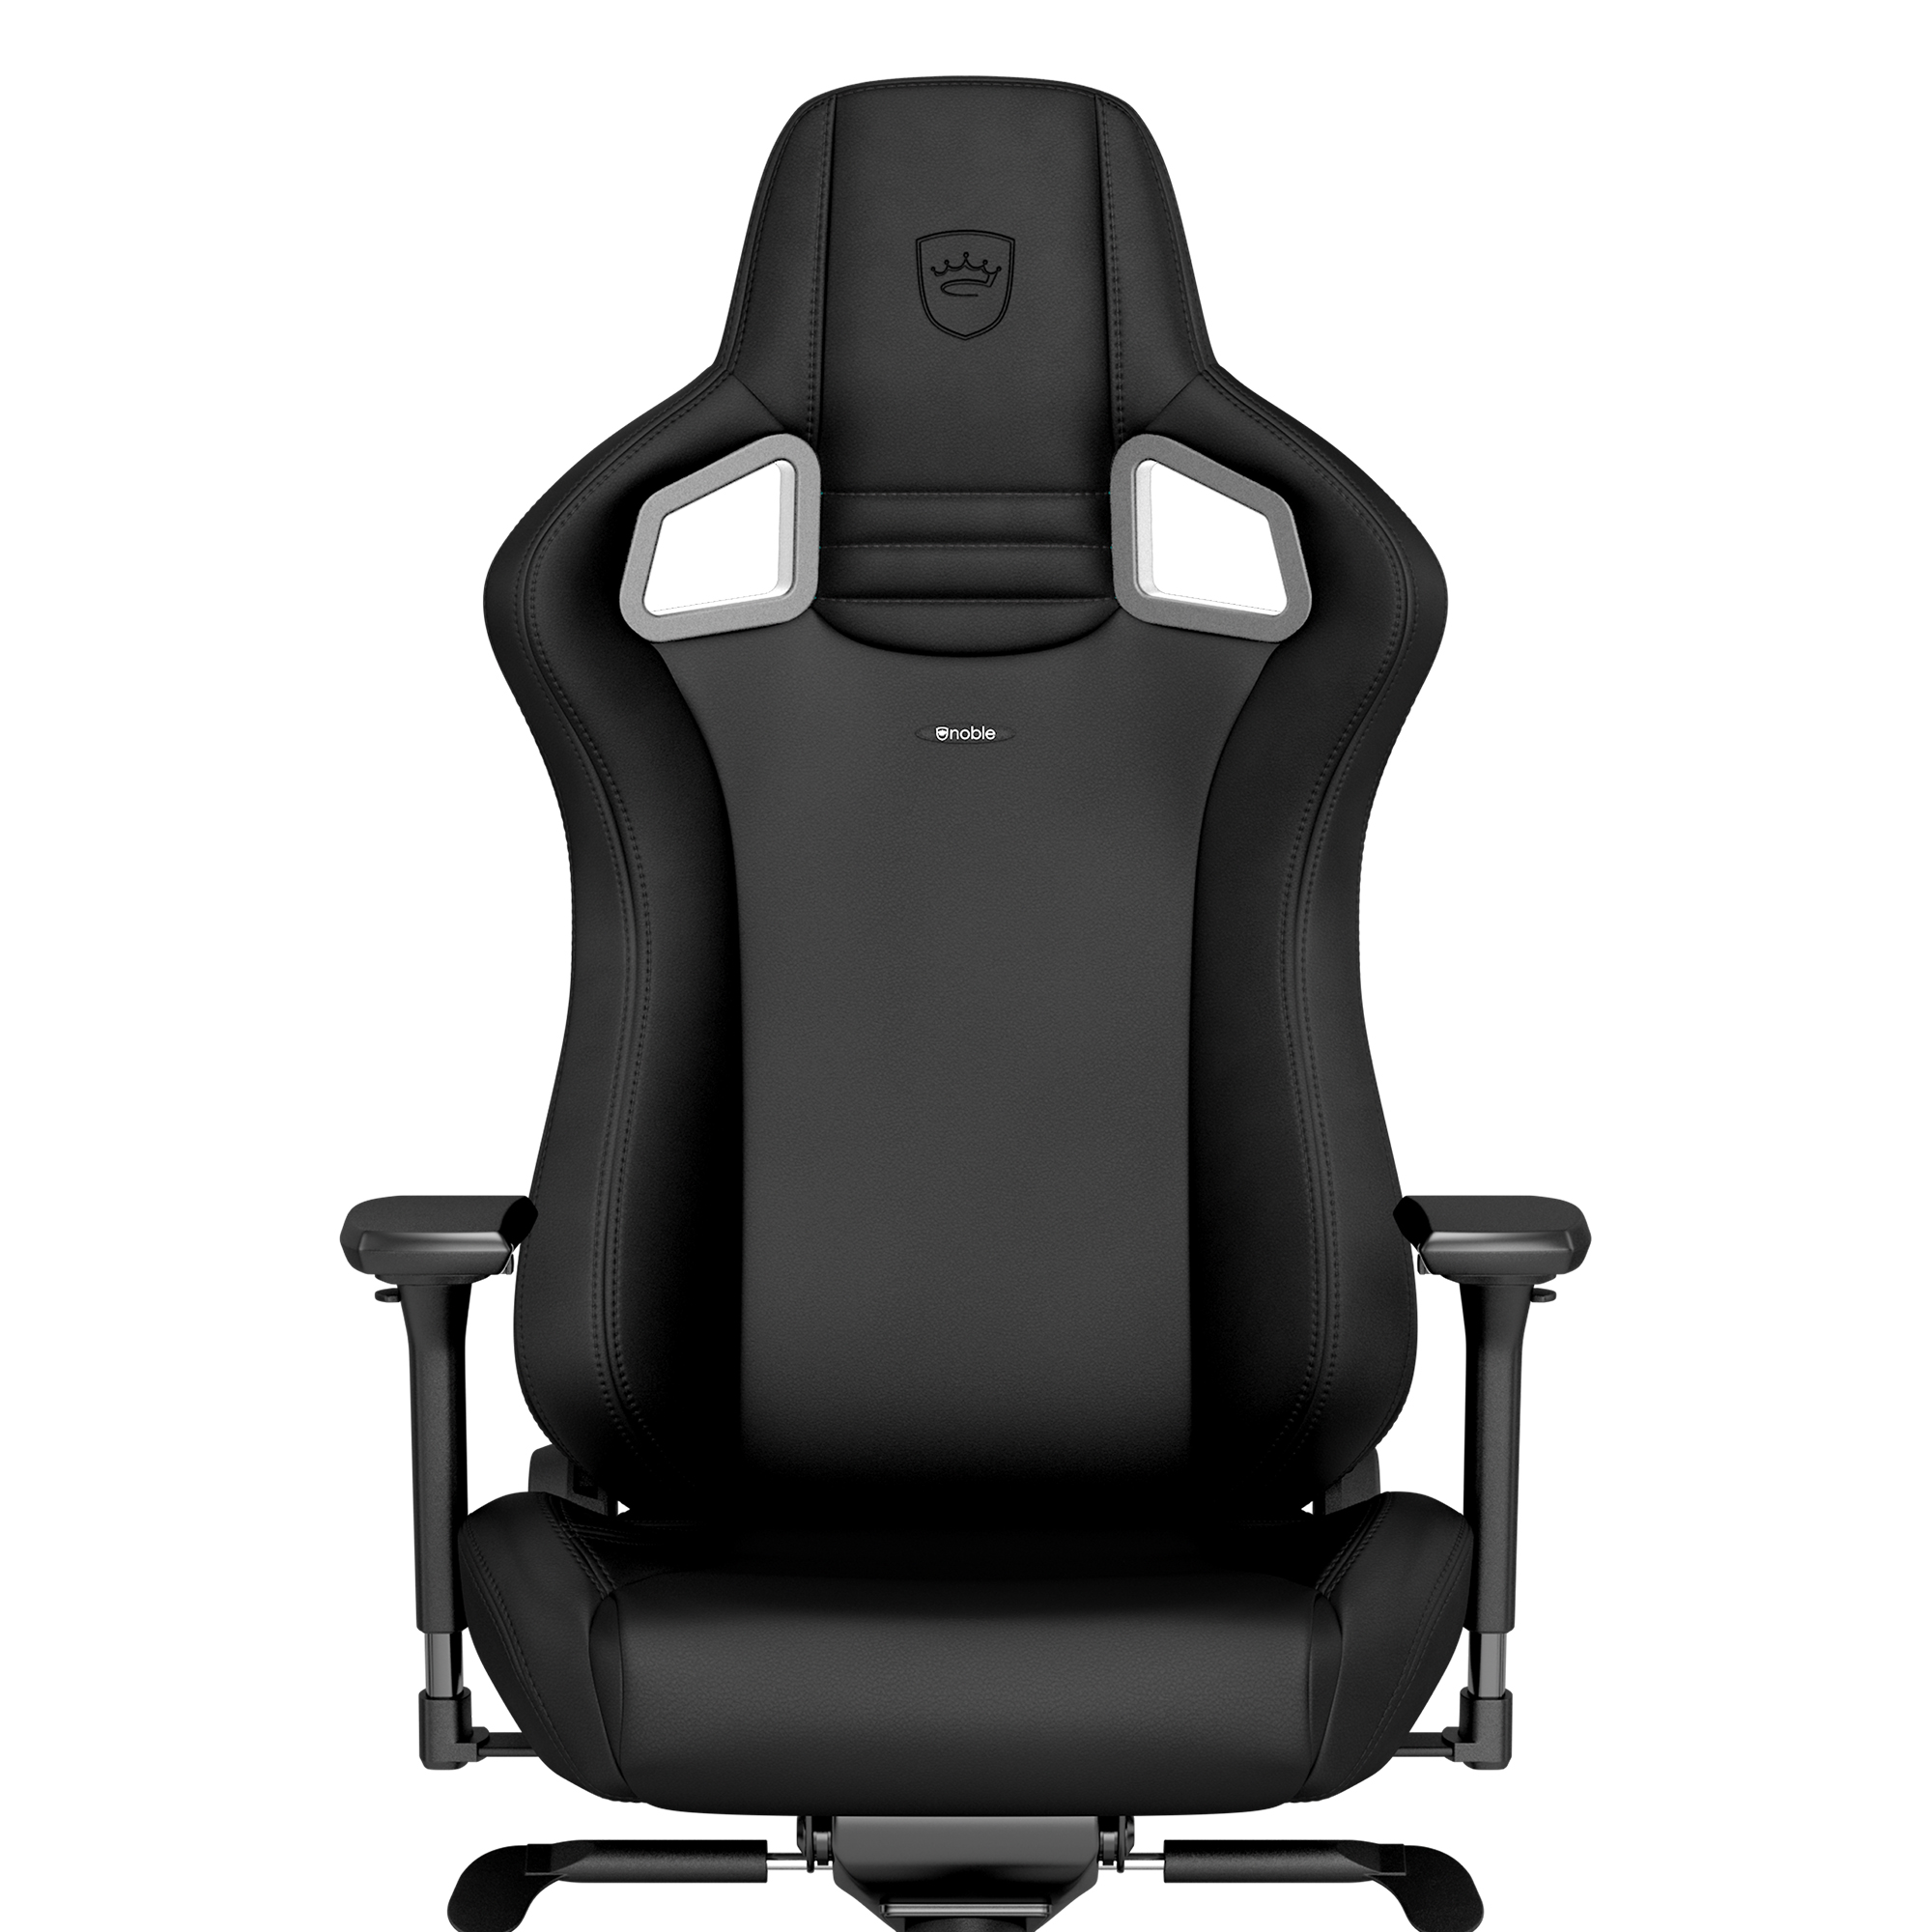 noblechairs - noblechairs EPIC Gaming Chair - Black Edition